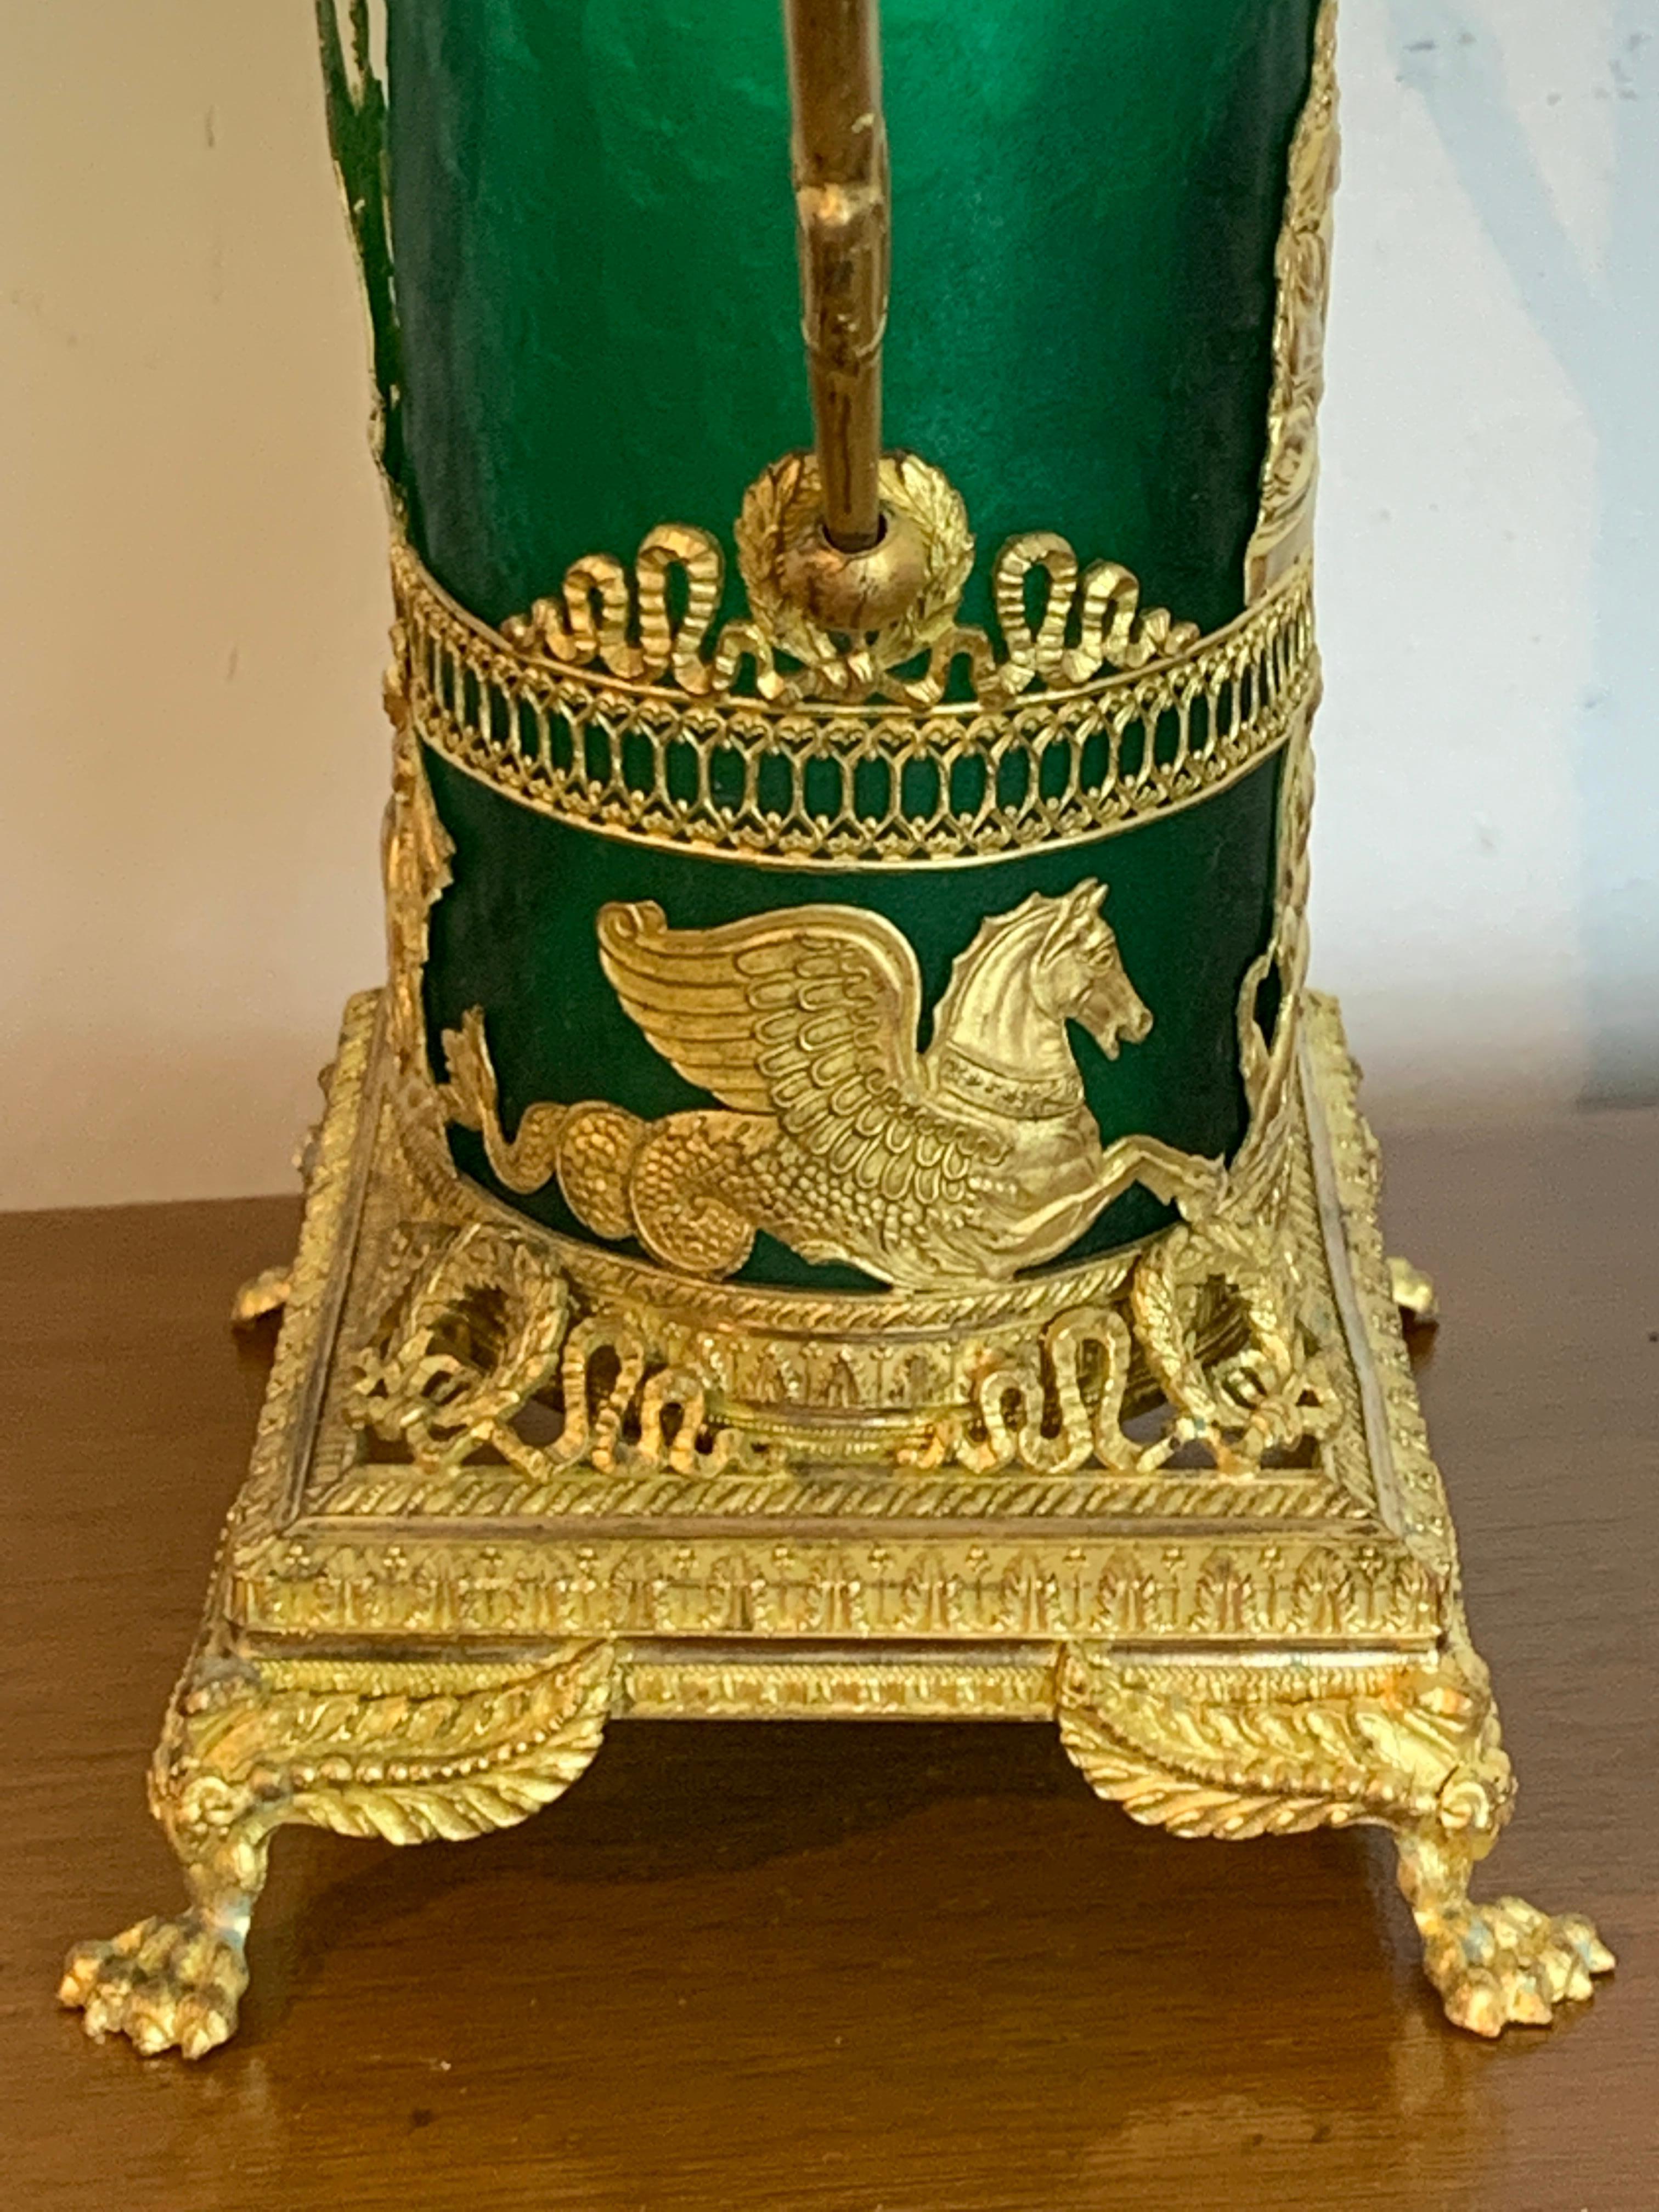 Exquisite Baccarat Empire Style Ormolu Mounted Vase, in Green 3